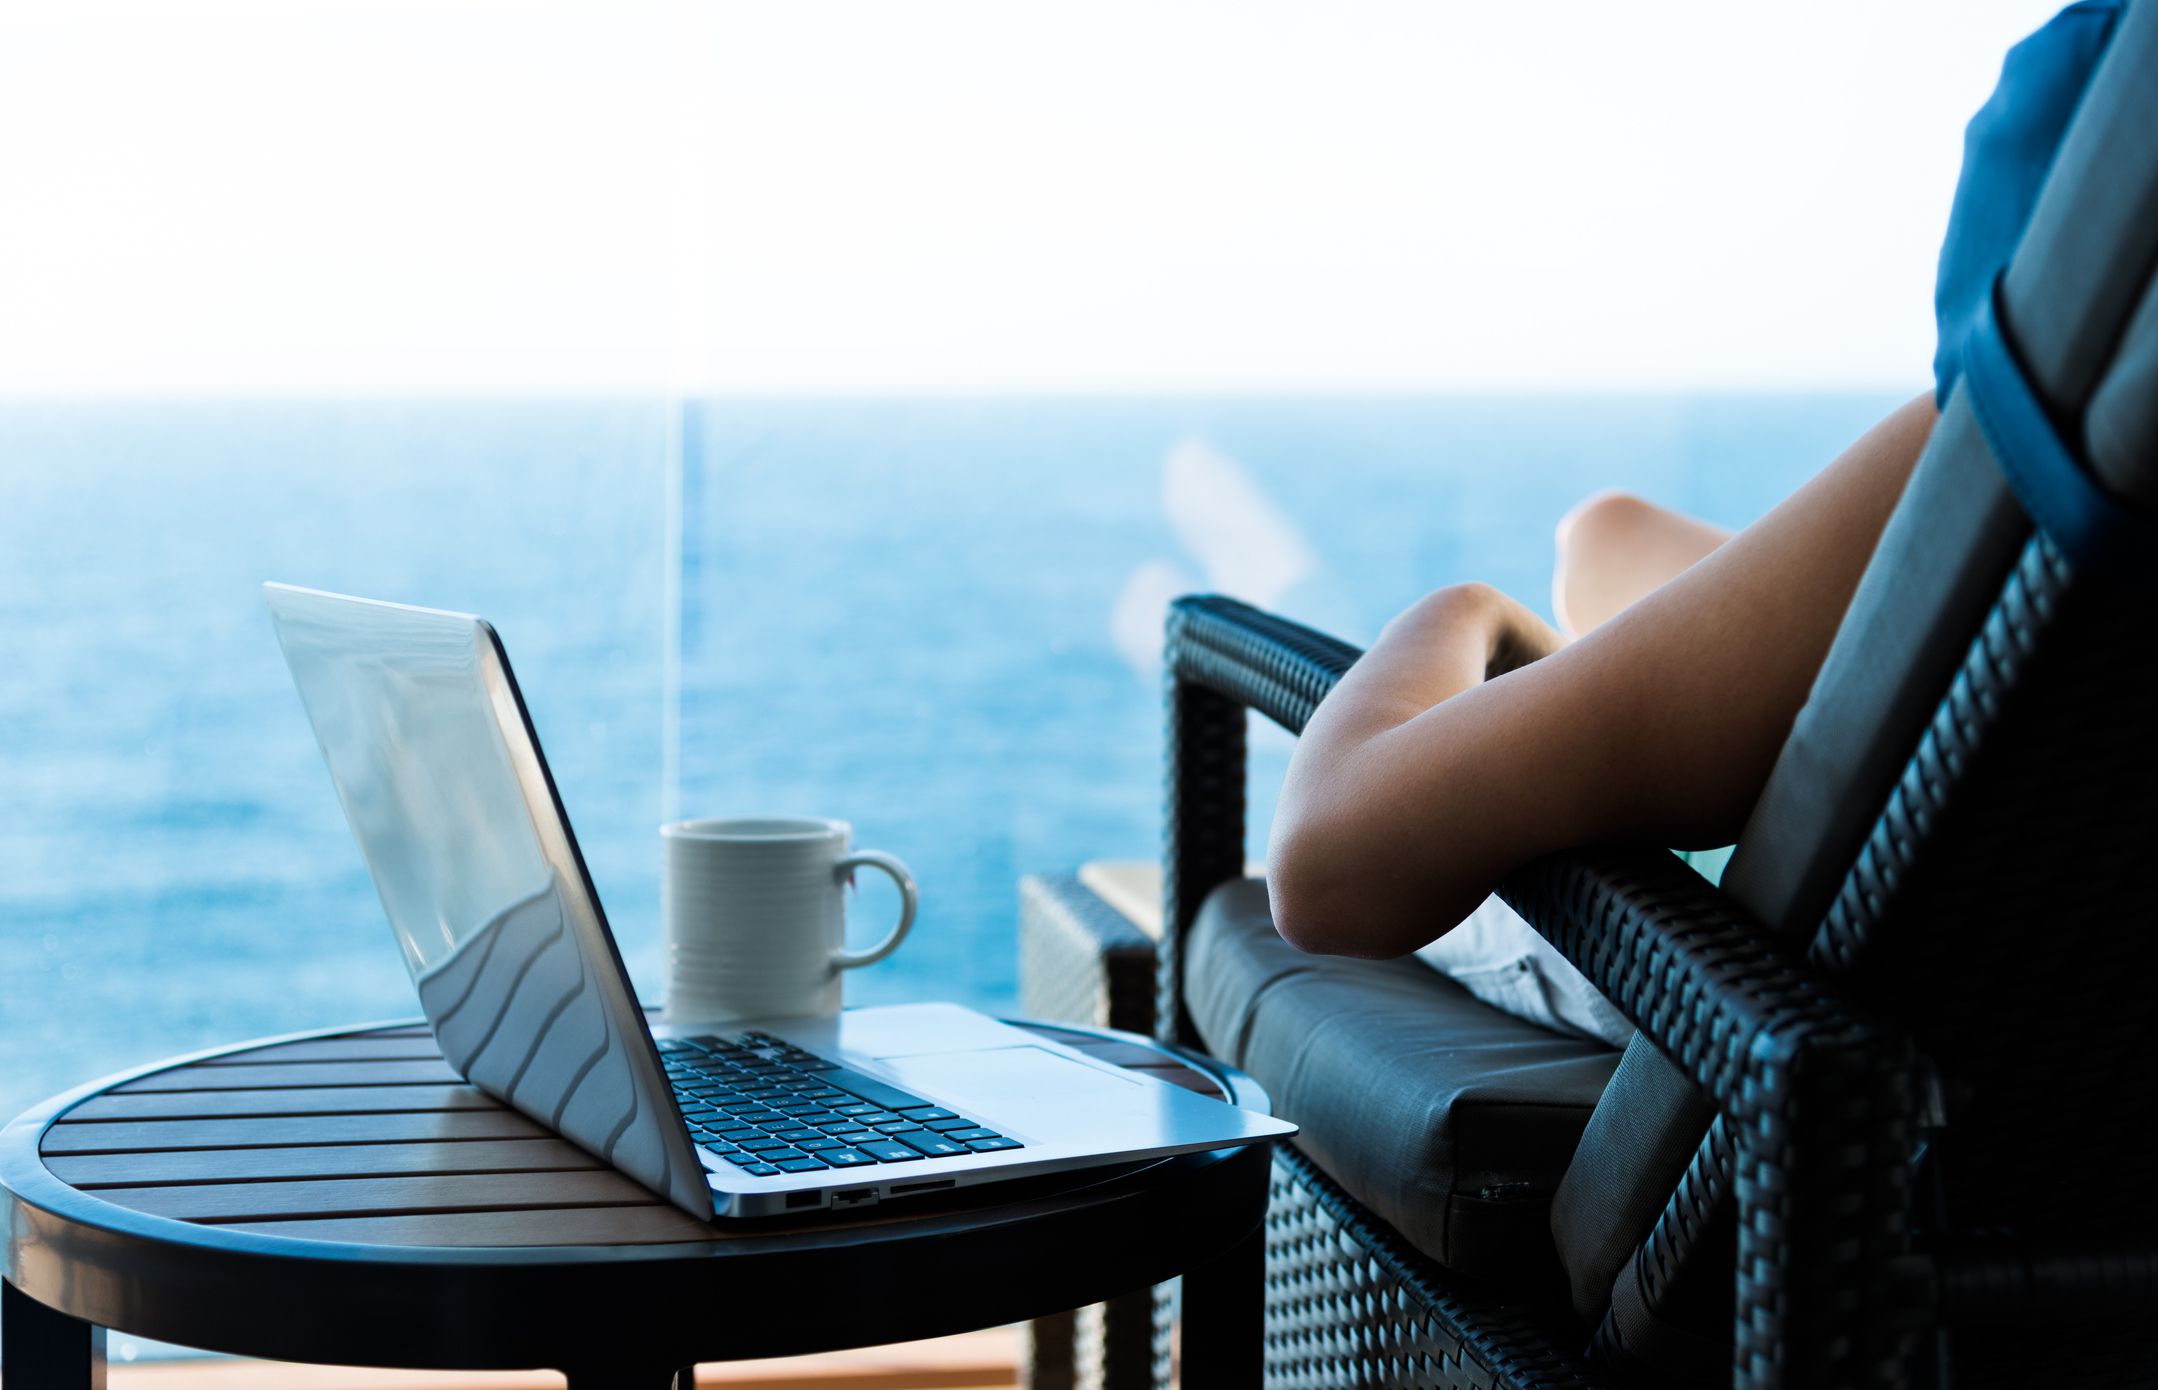 <p>Using the internet on board a cruise ship is expensive, like <i>really</i> expensive. Some lines <a href="https://www.cruisecritic.com/articles/cruise-line-wi-fi-and-internet-packages">charge $20 per hour</a>, and that's usually restricted to things like browsing email and social media sites only. On top of the price, the service is usually very slow, so you're not going to be able to get a lot done in those 60 minutes. Instead, plan to disconnect and enjoy your vacation, or do as most people do and mob the Starbucks in port and use its free Wi-Fi instead.</p><div class="rich-text"><p>This article was originally published on <a href="https://blog.cheapism.com/things-to-never-do-on-a-cruise/">Cheapism</a></p></div>